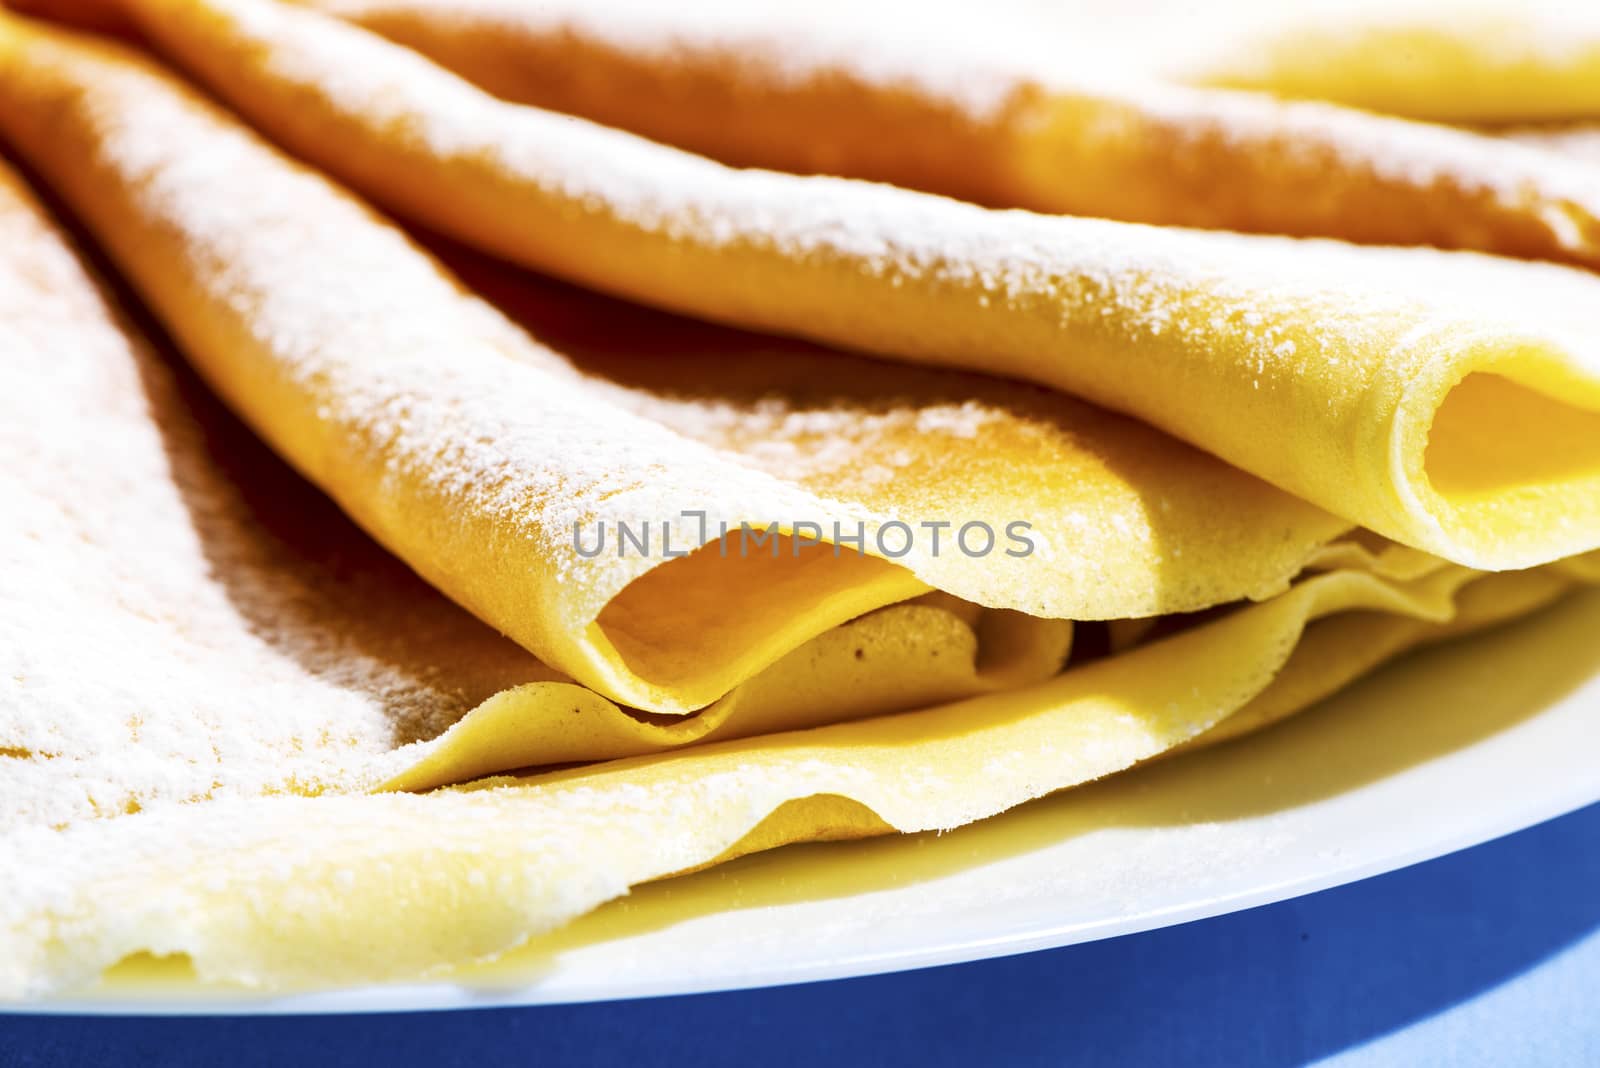 Freshly baked golden pancakes or crepes neatly folded in a plate